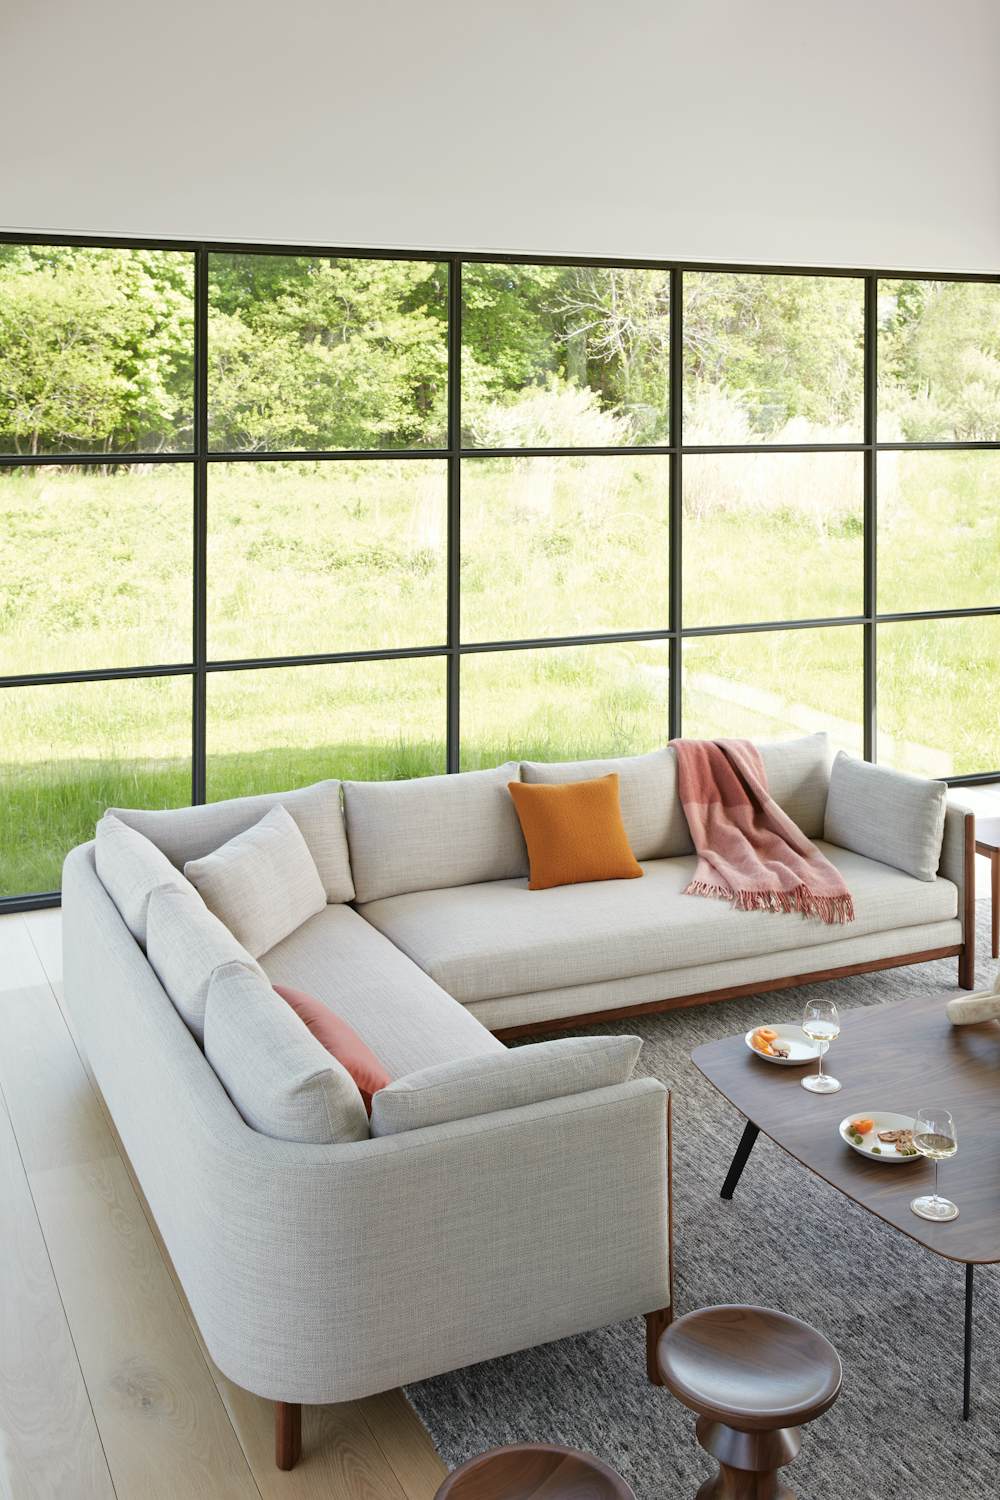 Emmy Corner Sectional in a living room setting